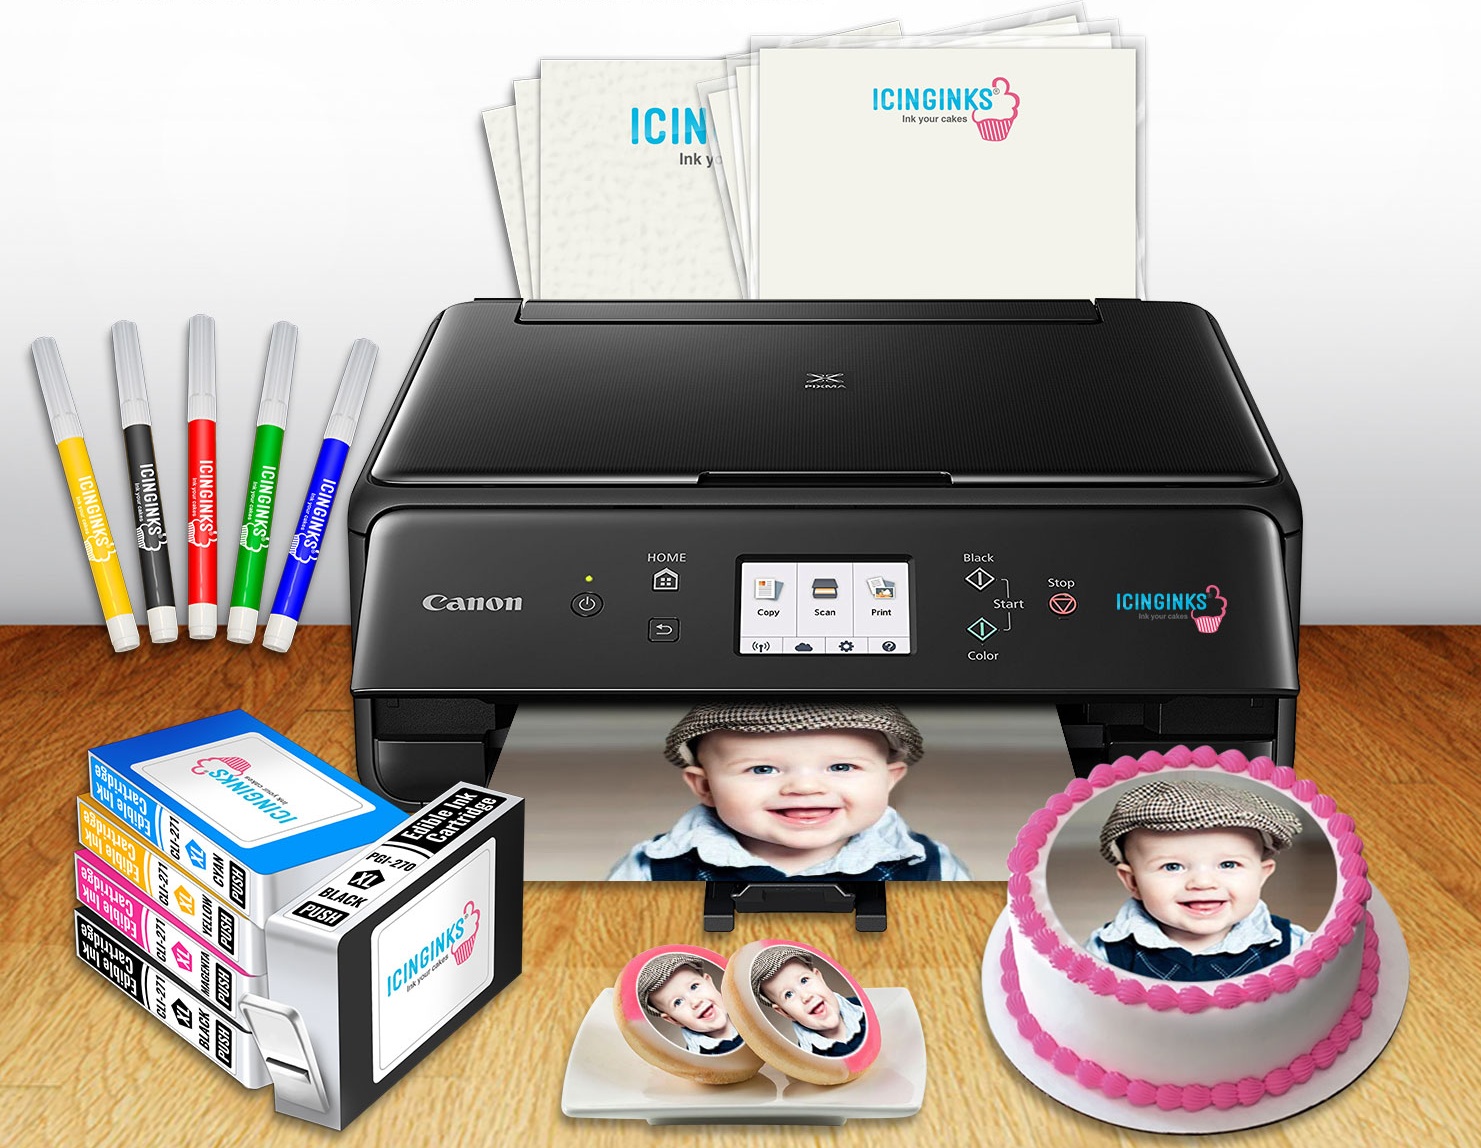 How to Use Edible Ink to Print Pictures on Cake or Food